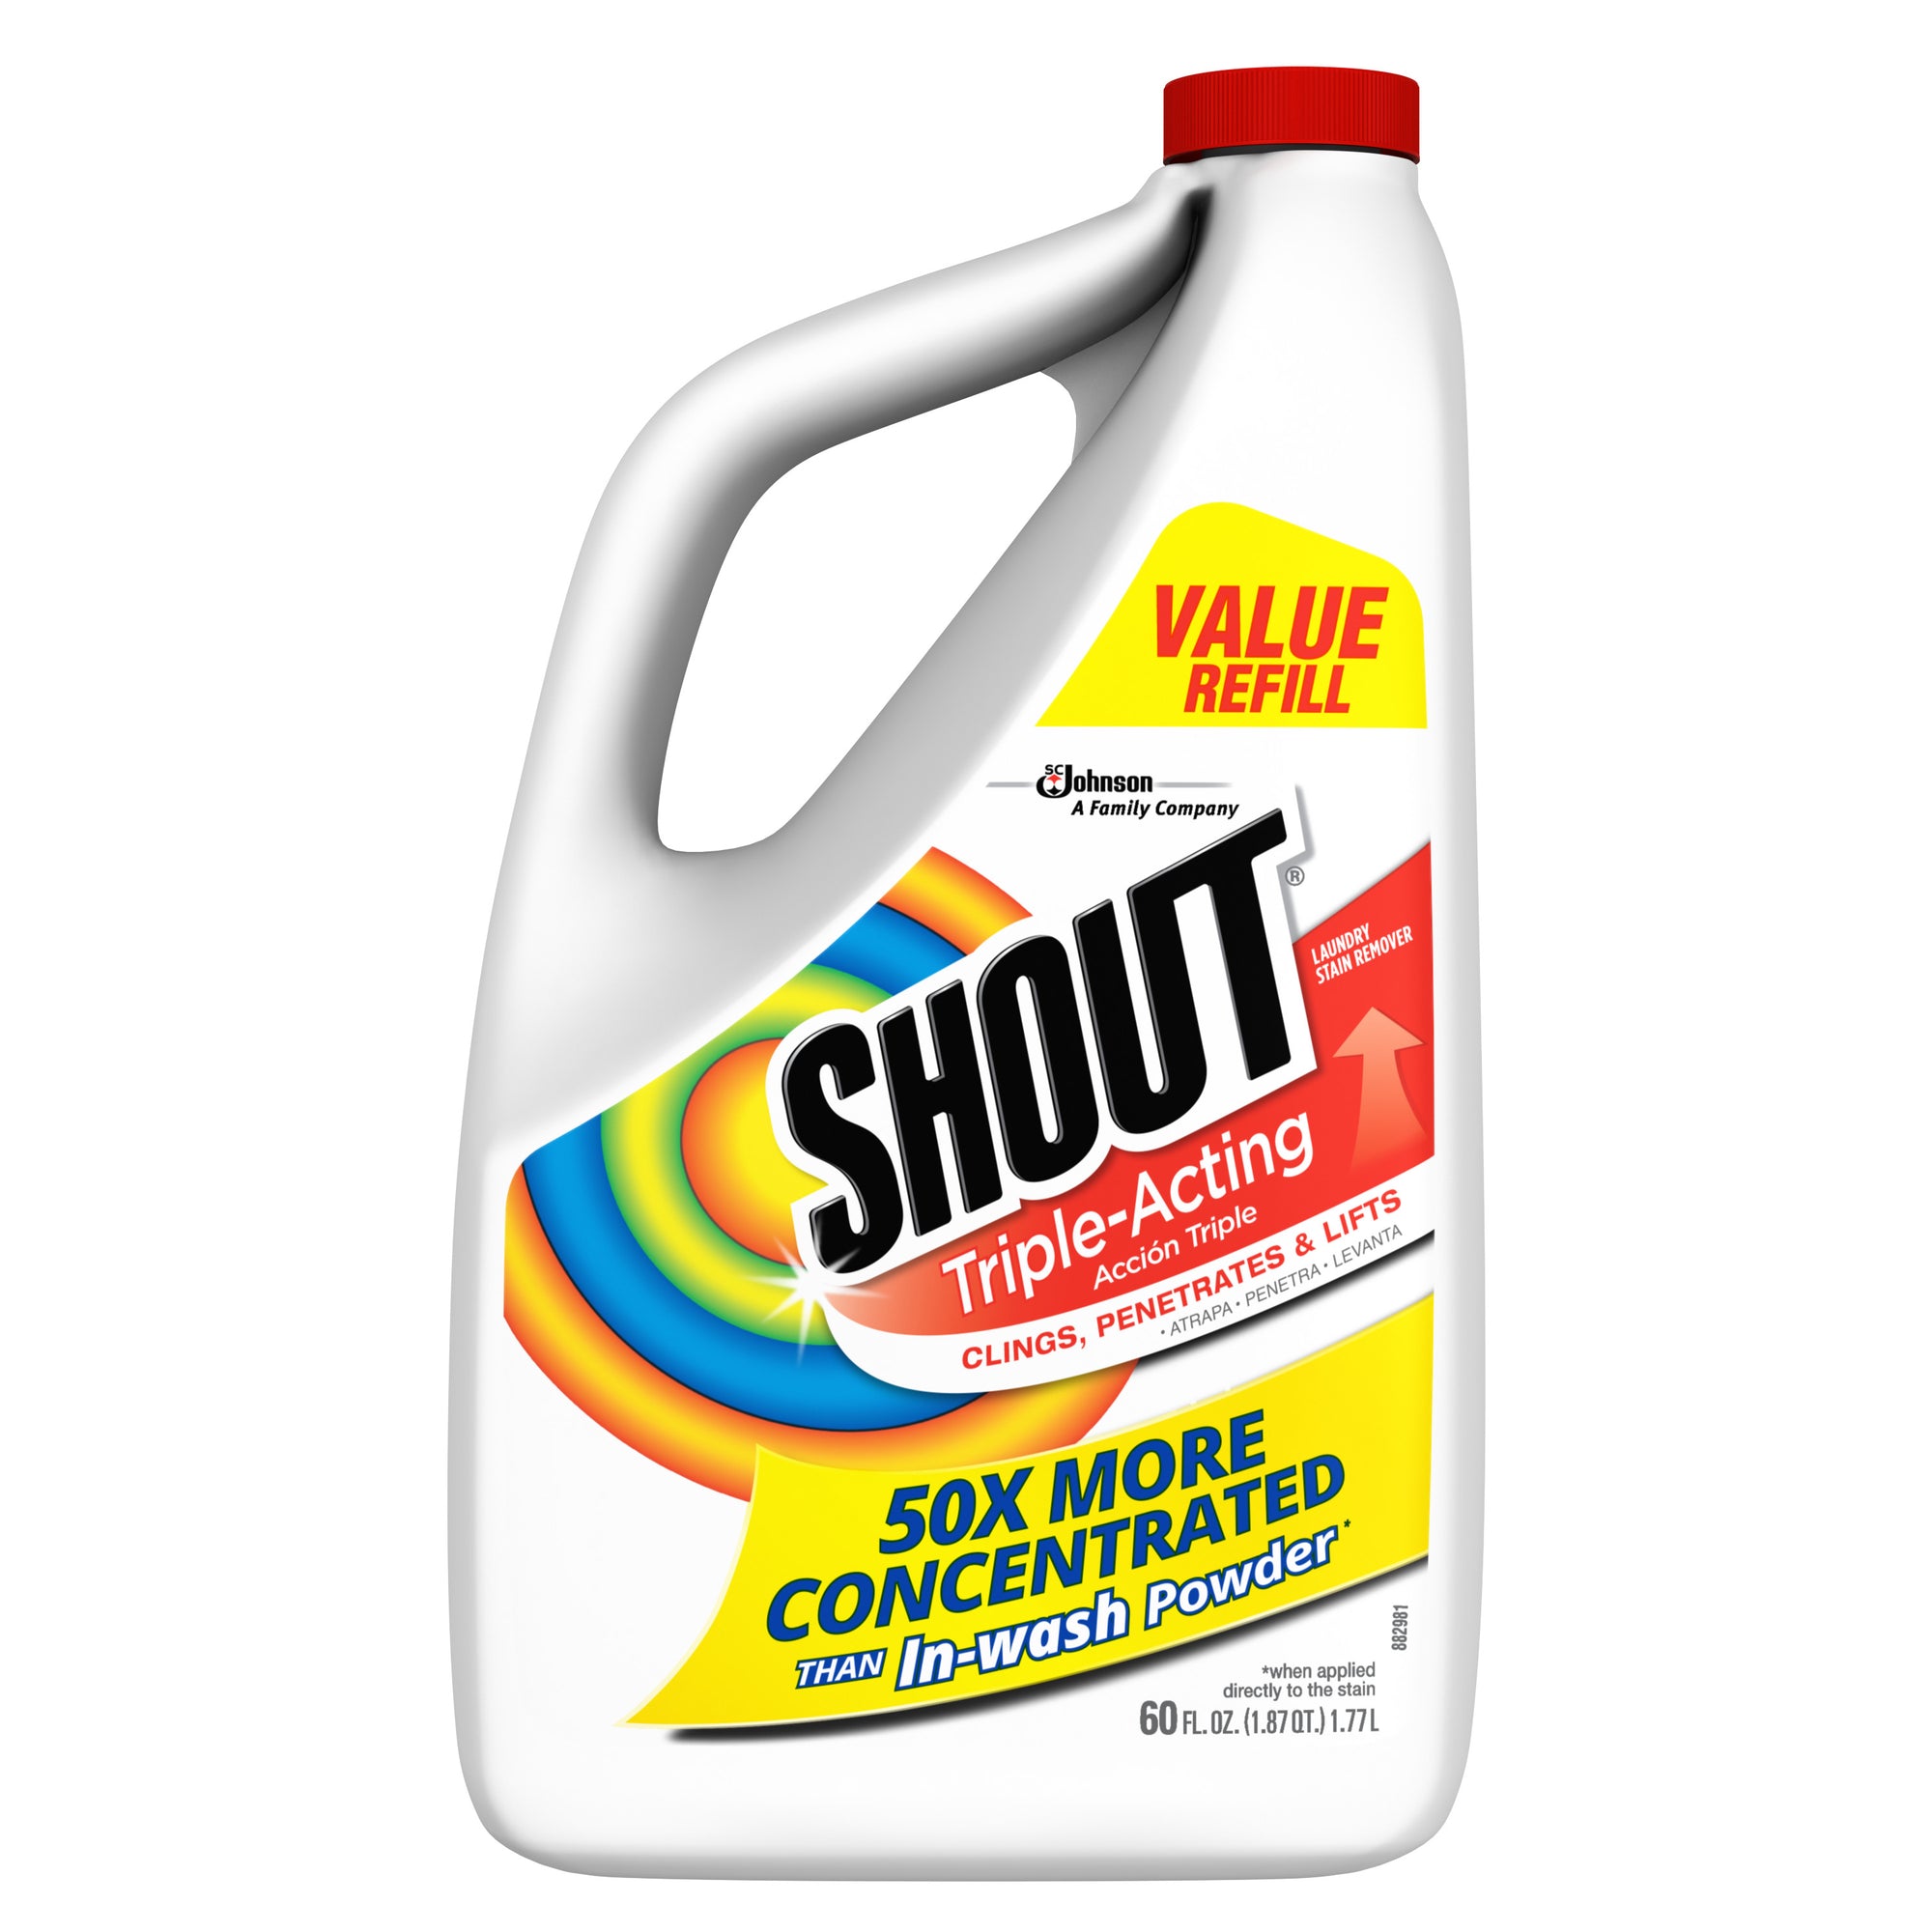 Shout Triple-Acting Laundry Stain Remover Refill, 60 Fl Oz